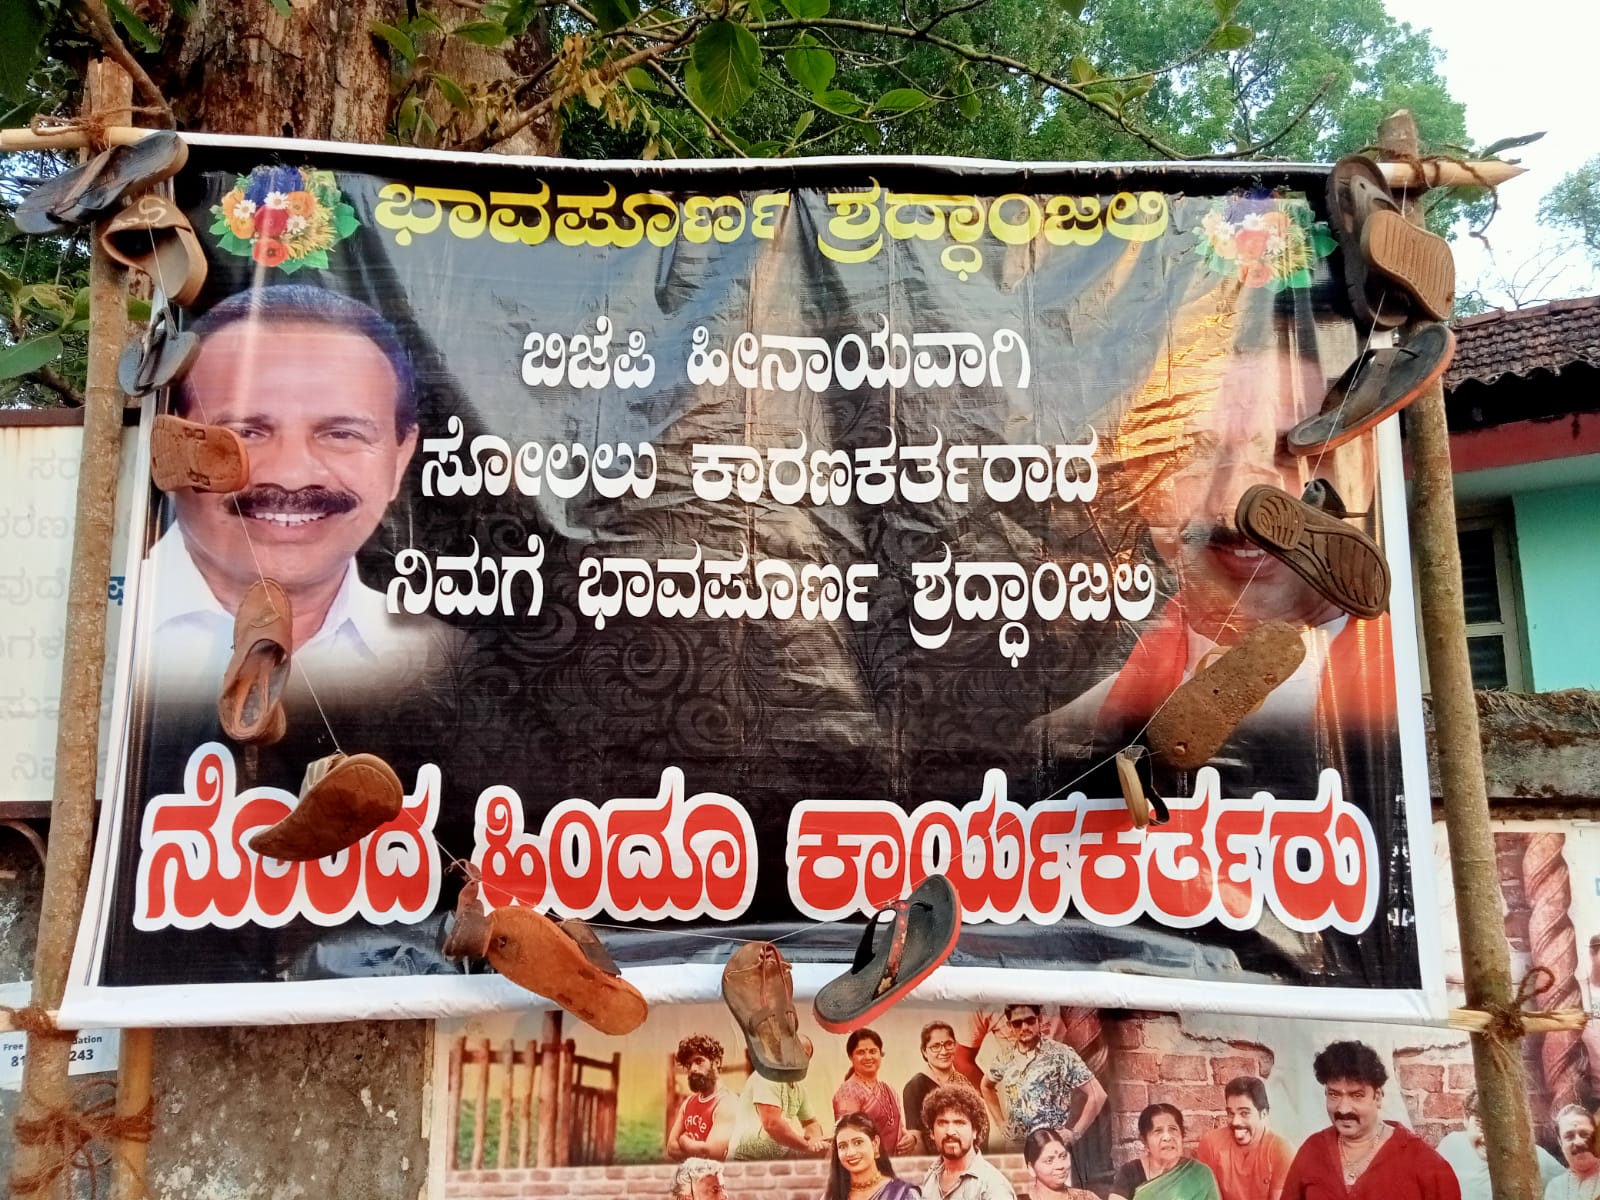 The objectionable banner that was erected at Puttur Bus Stand